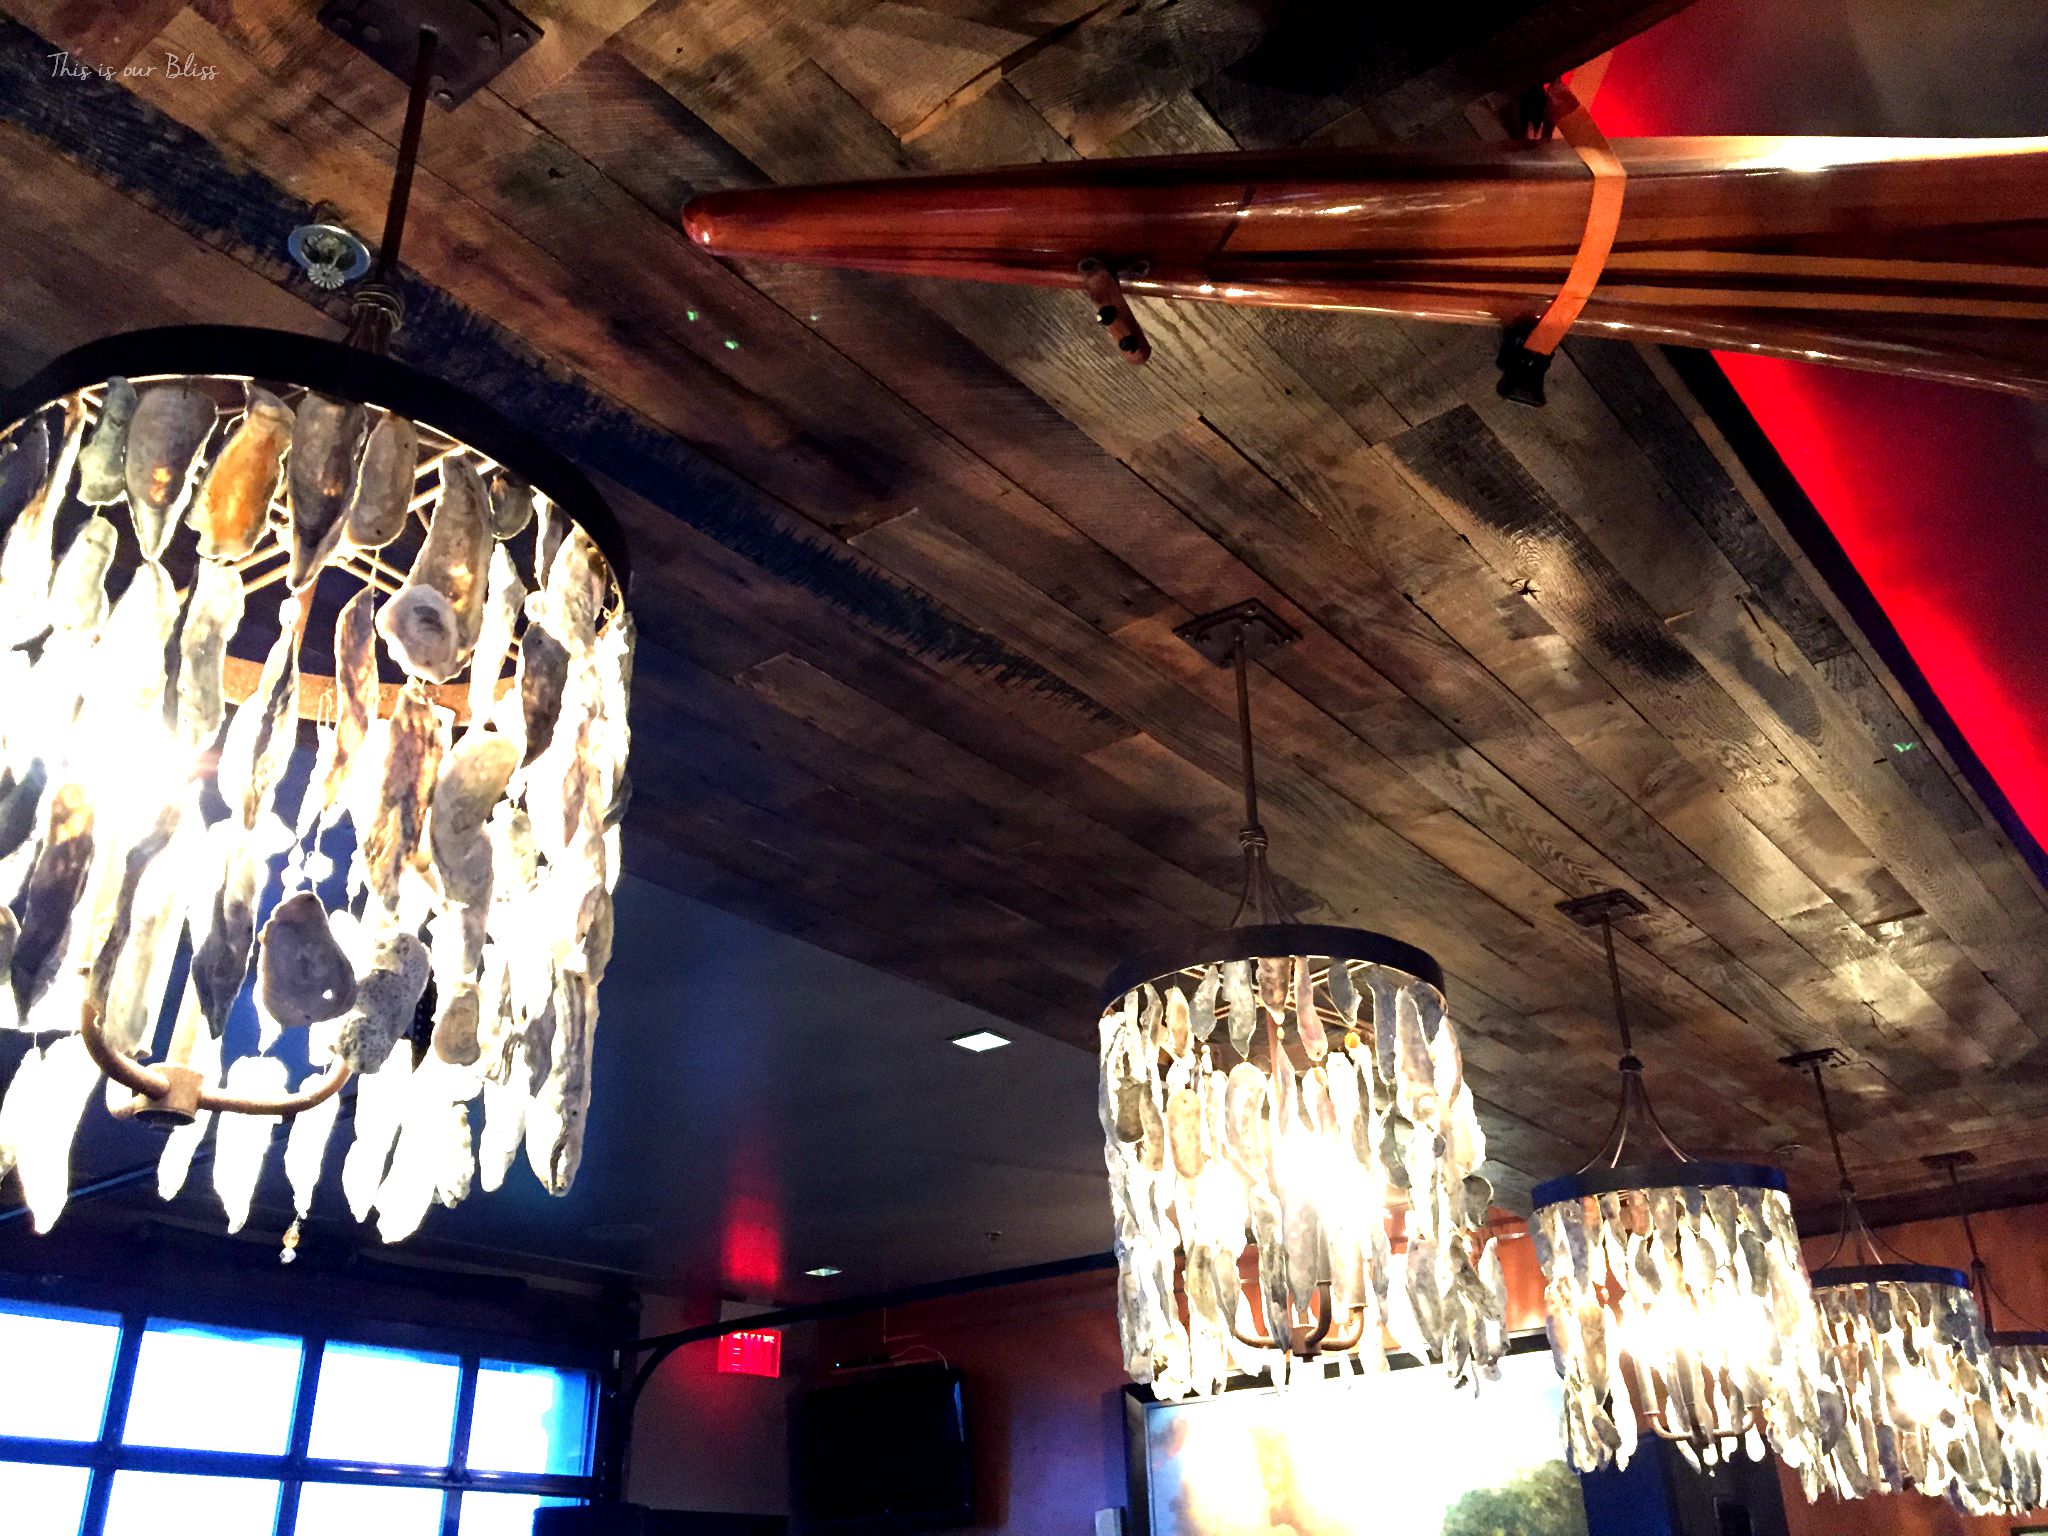 Rocks on the River - ceiling of bar - Savannah GA - This is our Bliss